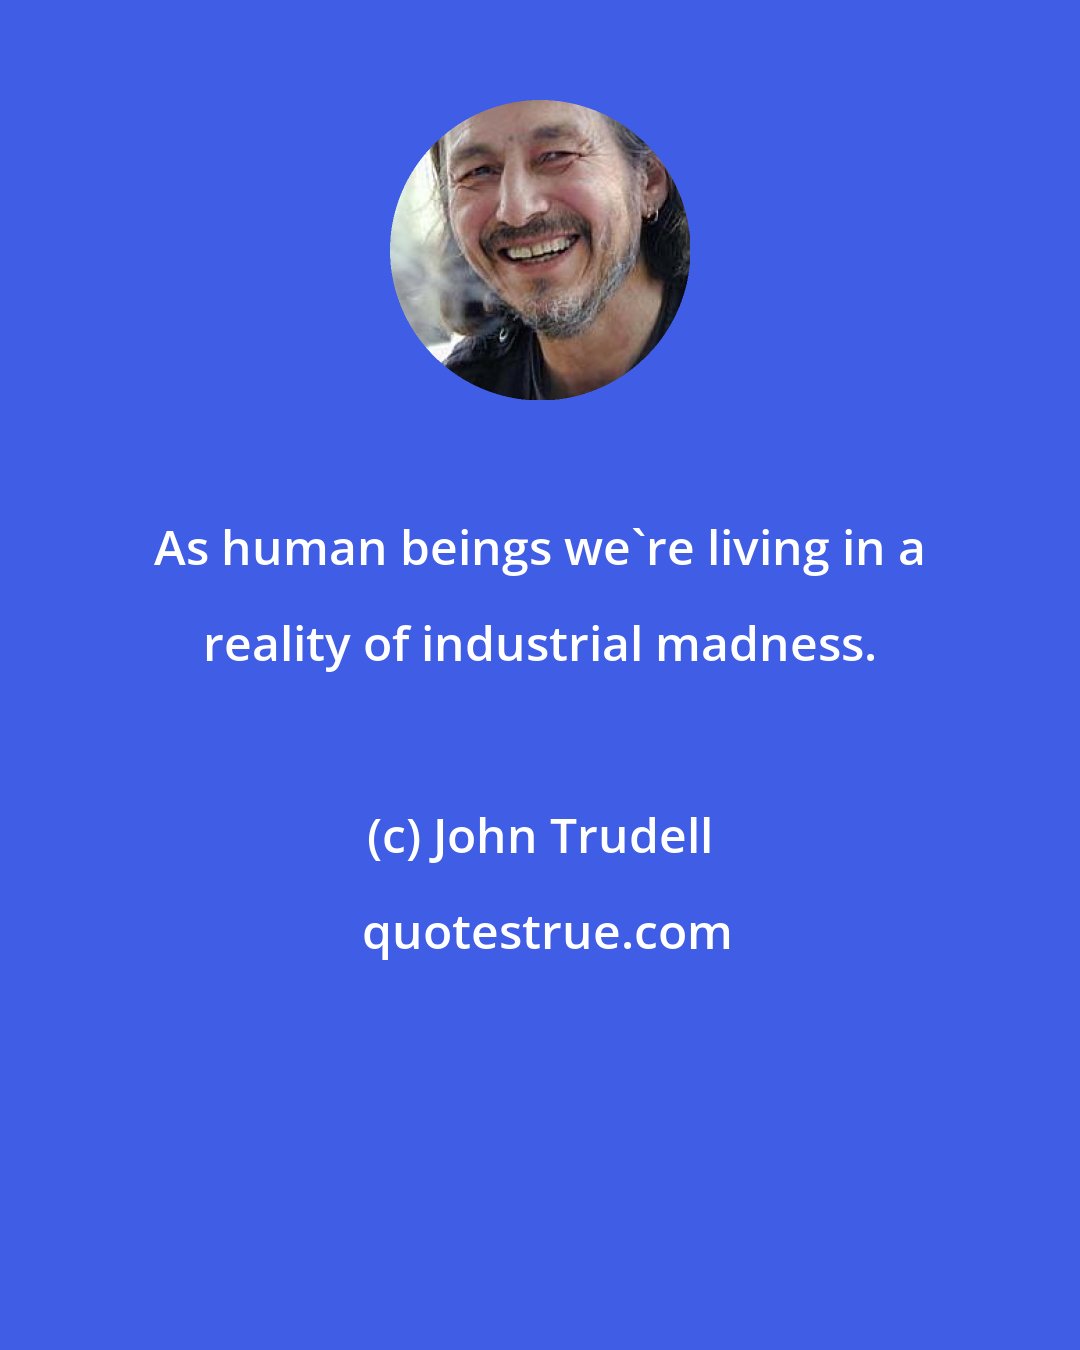 John Trudell: As human beings we're living in a reality of industrial madness.